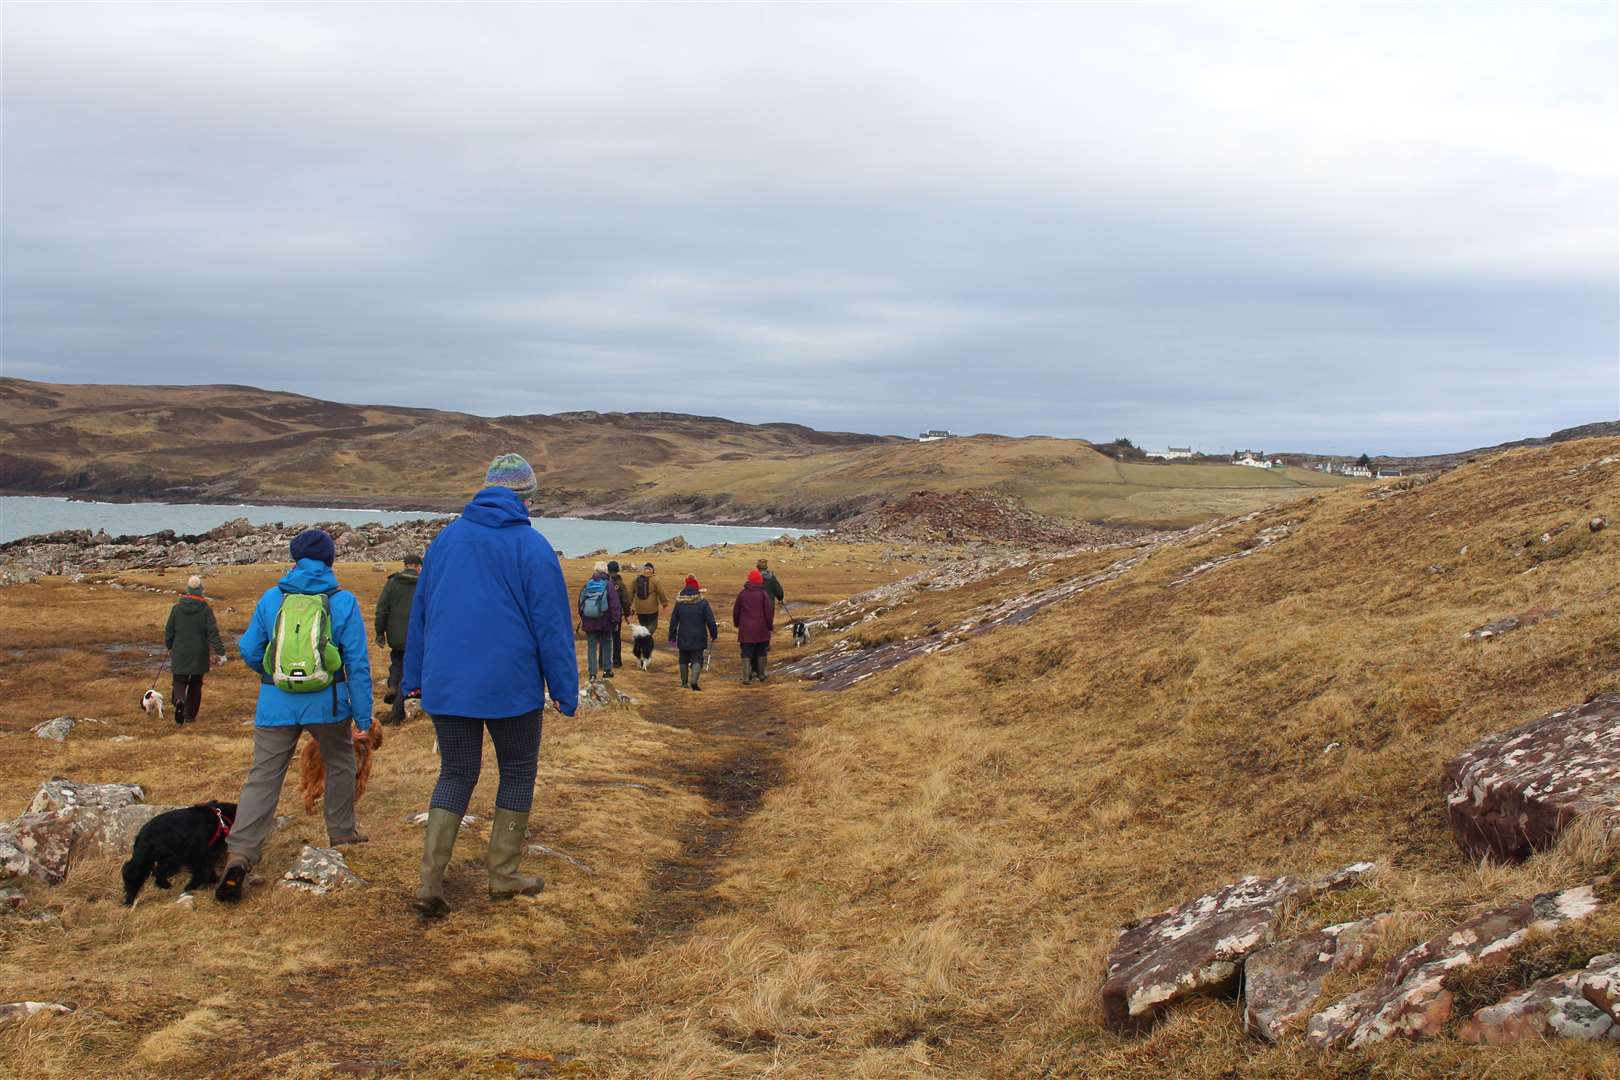 The Historic Assynt group walking towards Clachtoll Broch.